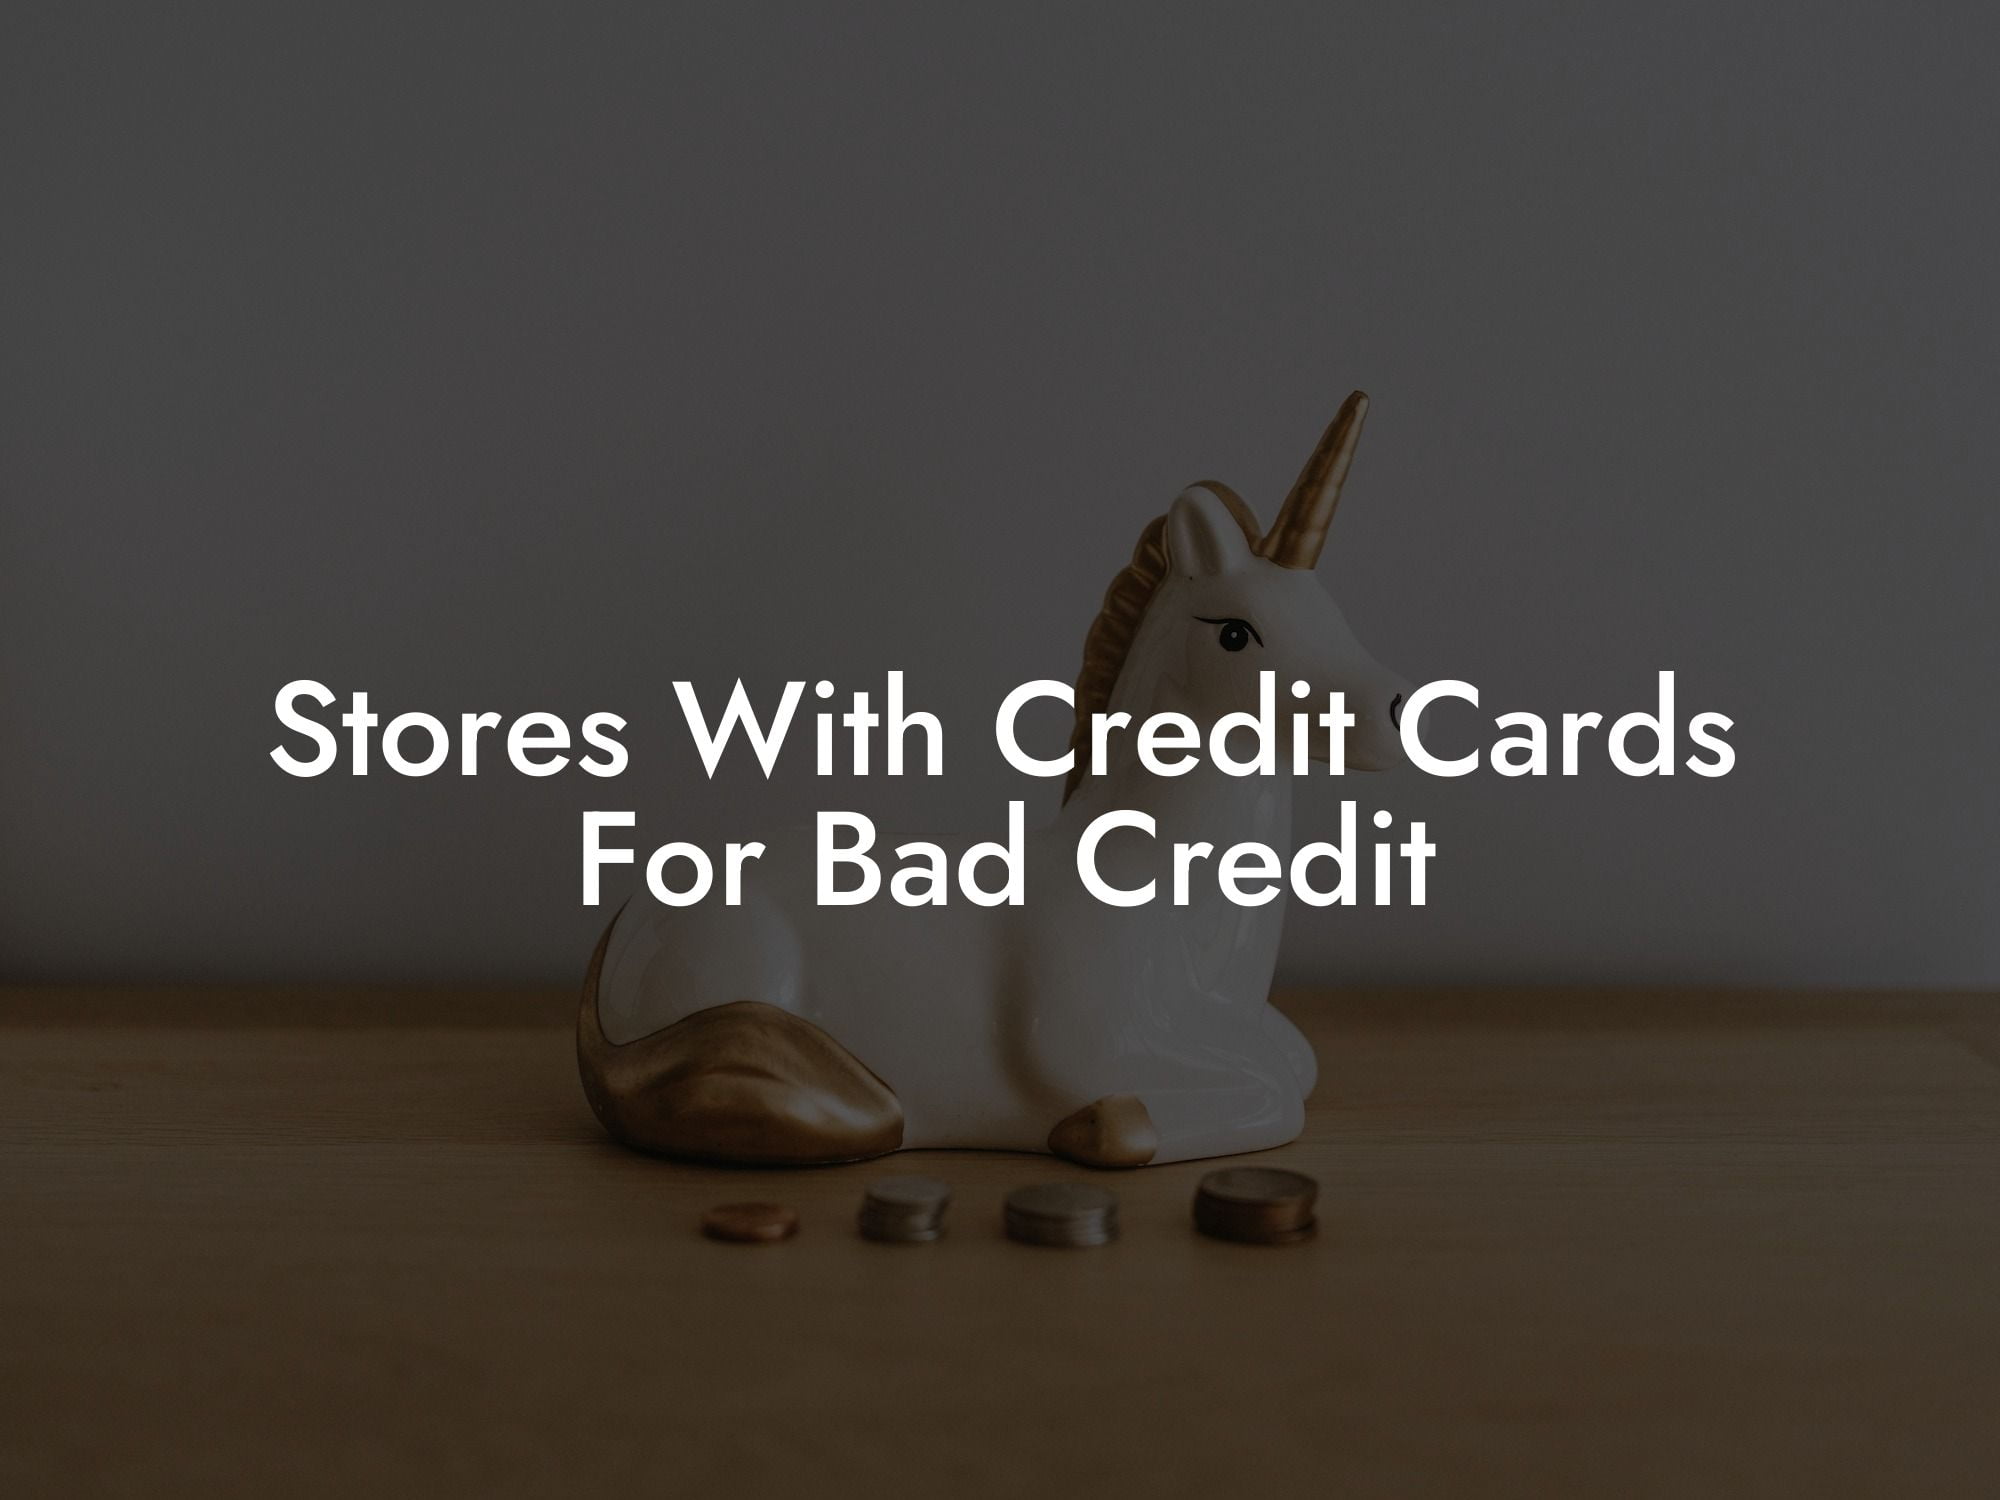 Stores With Credit Cards For Bad Credit